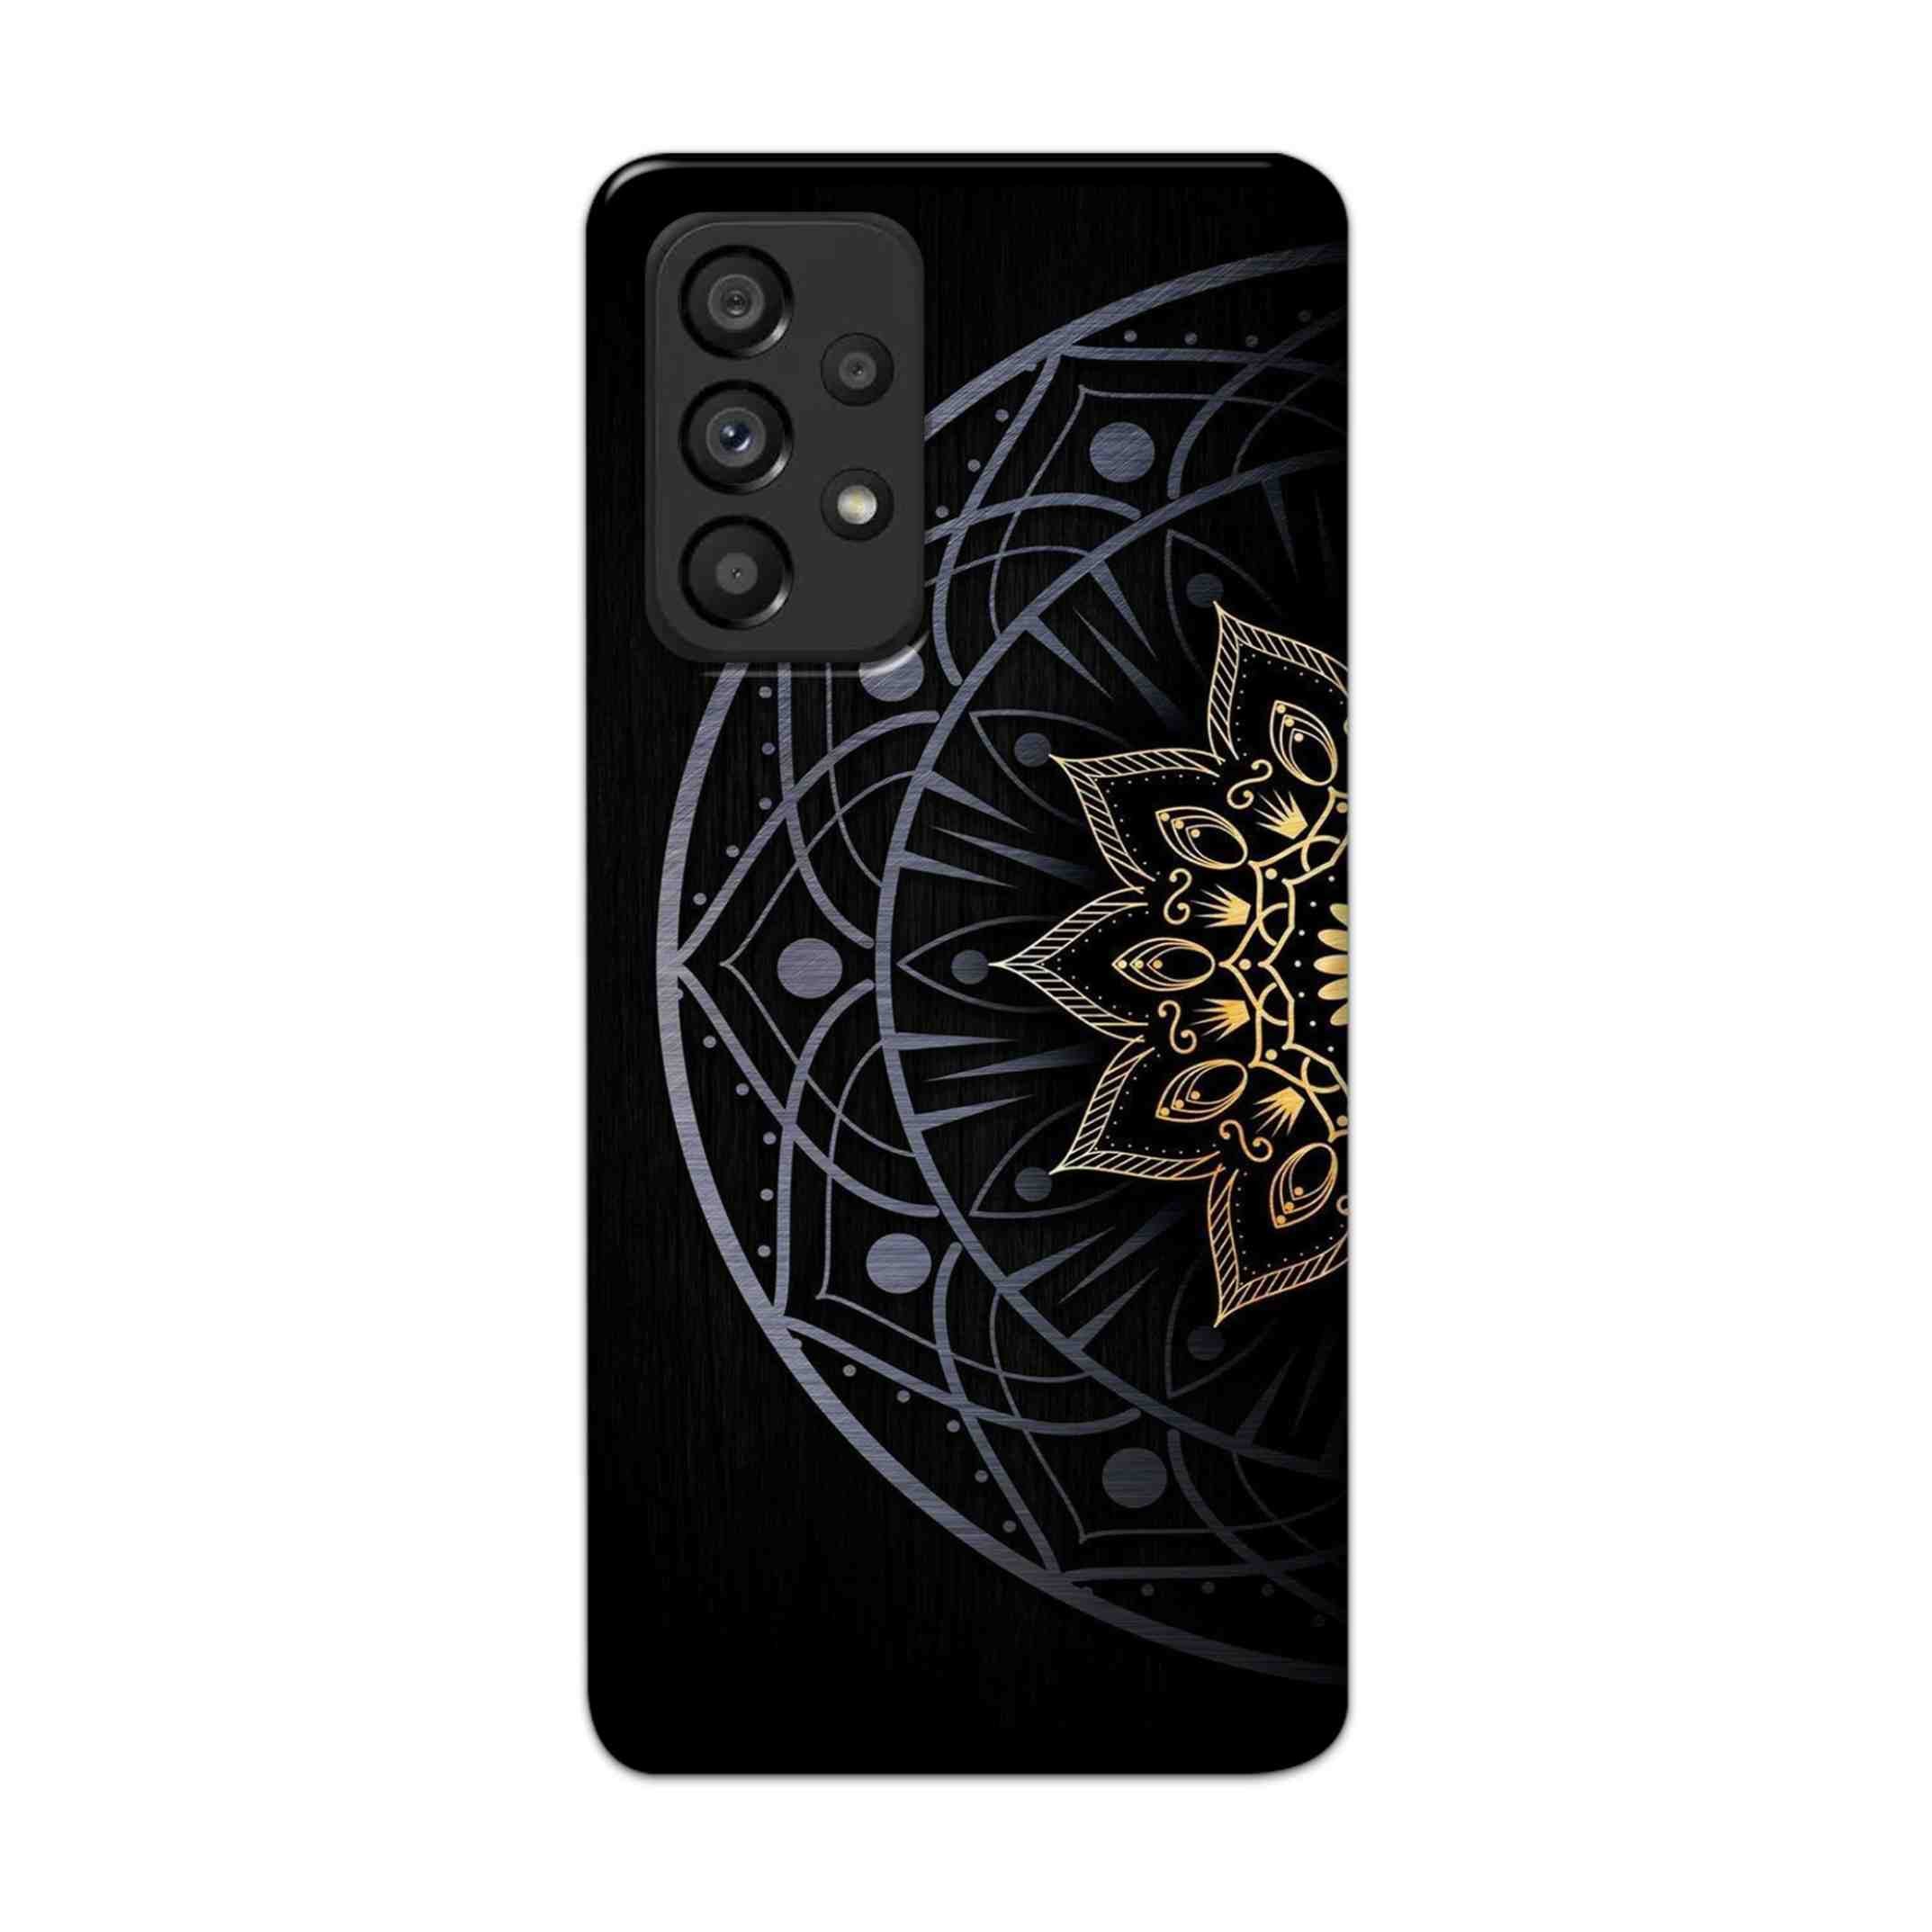 Buy Psychedelic Mandalas Hard Back Mobile Phone Case Cover For Samsung Galaxy A53 5G Online